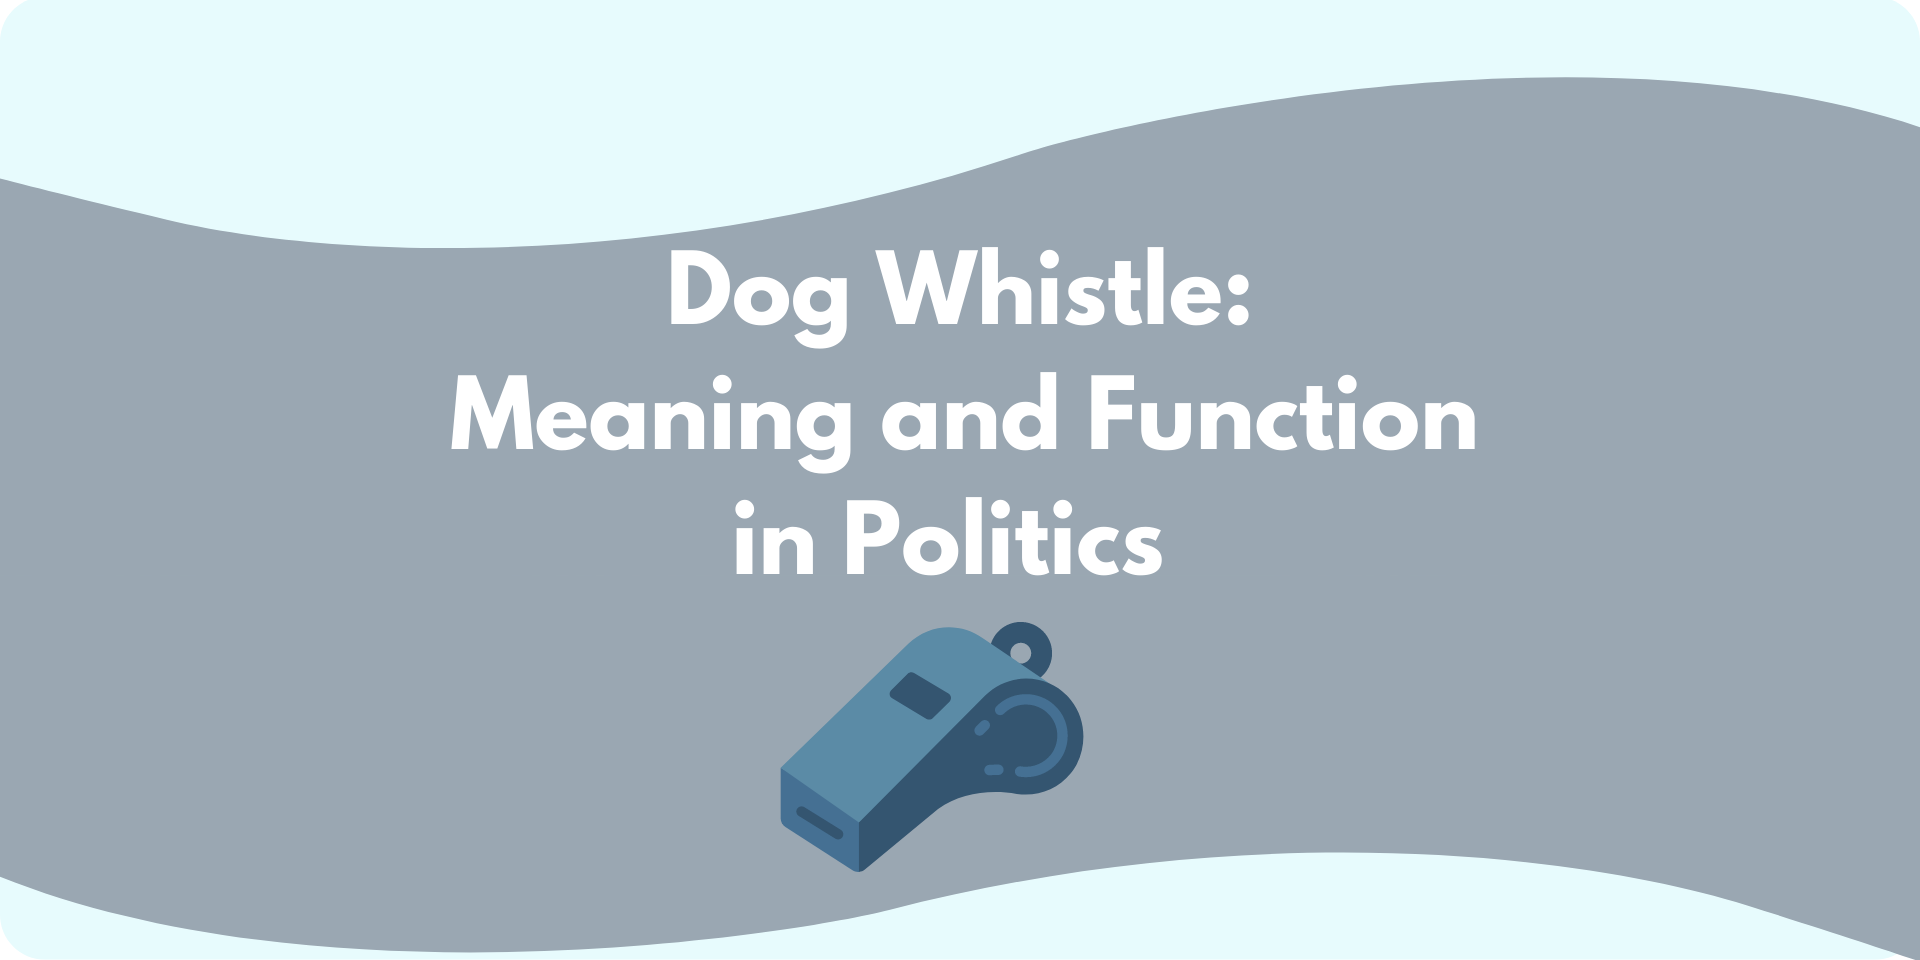 A graphic of a whistle with the words: "Dog Whistle: Meaning and Function in Politics